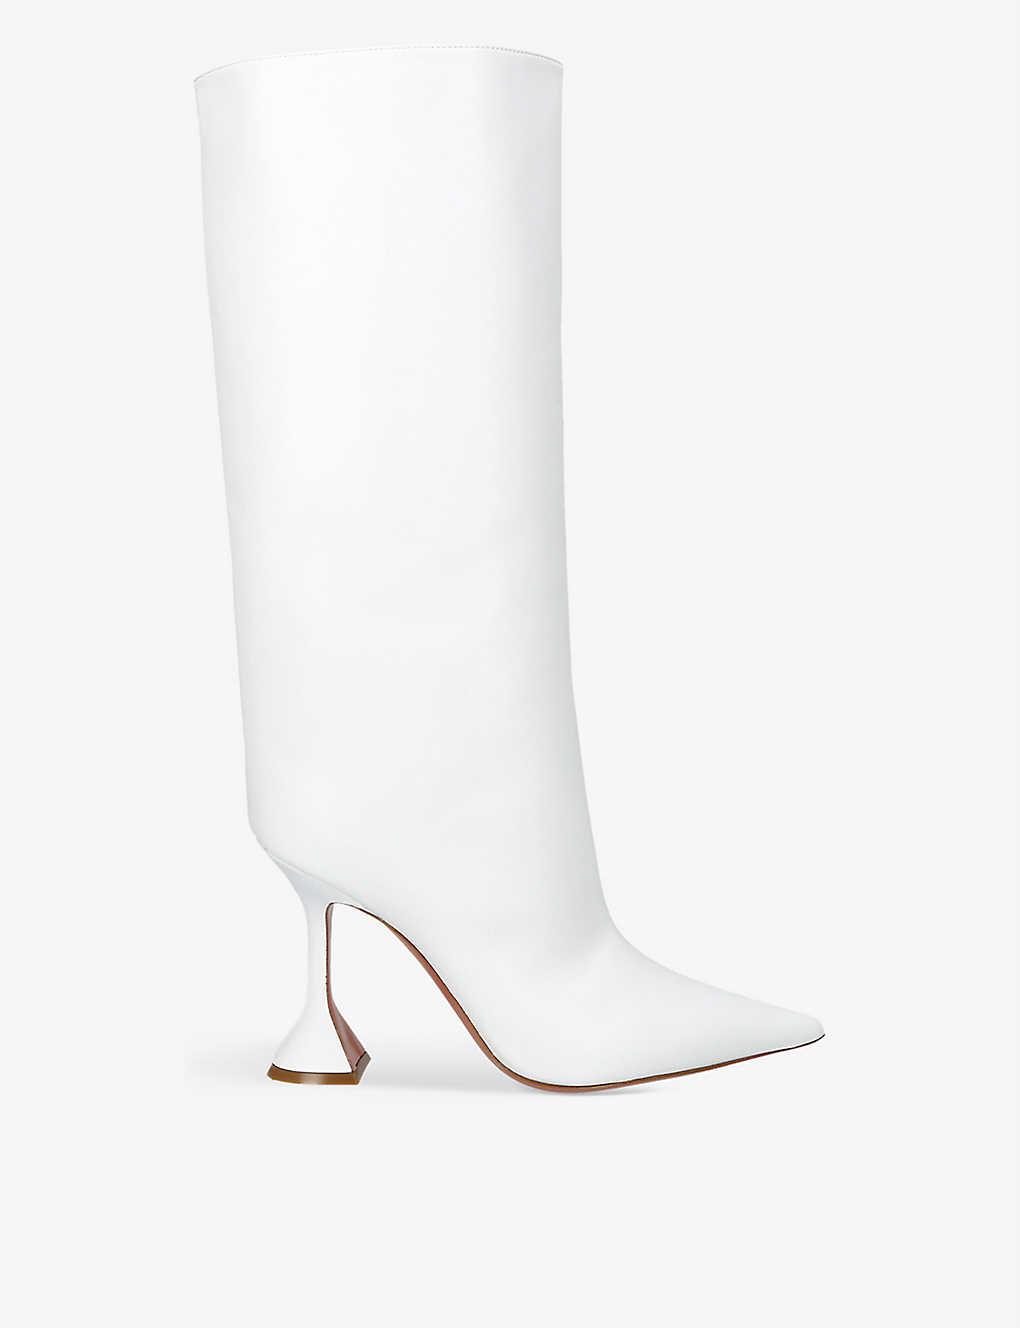 AMINA MUADDI Fiona Knee-high Leather Boots in White | Lyst